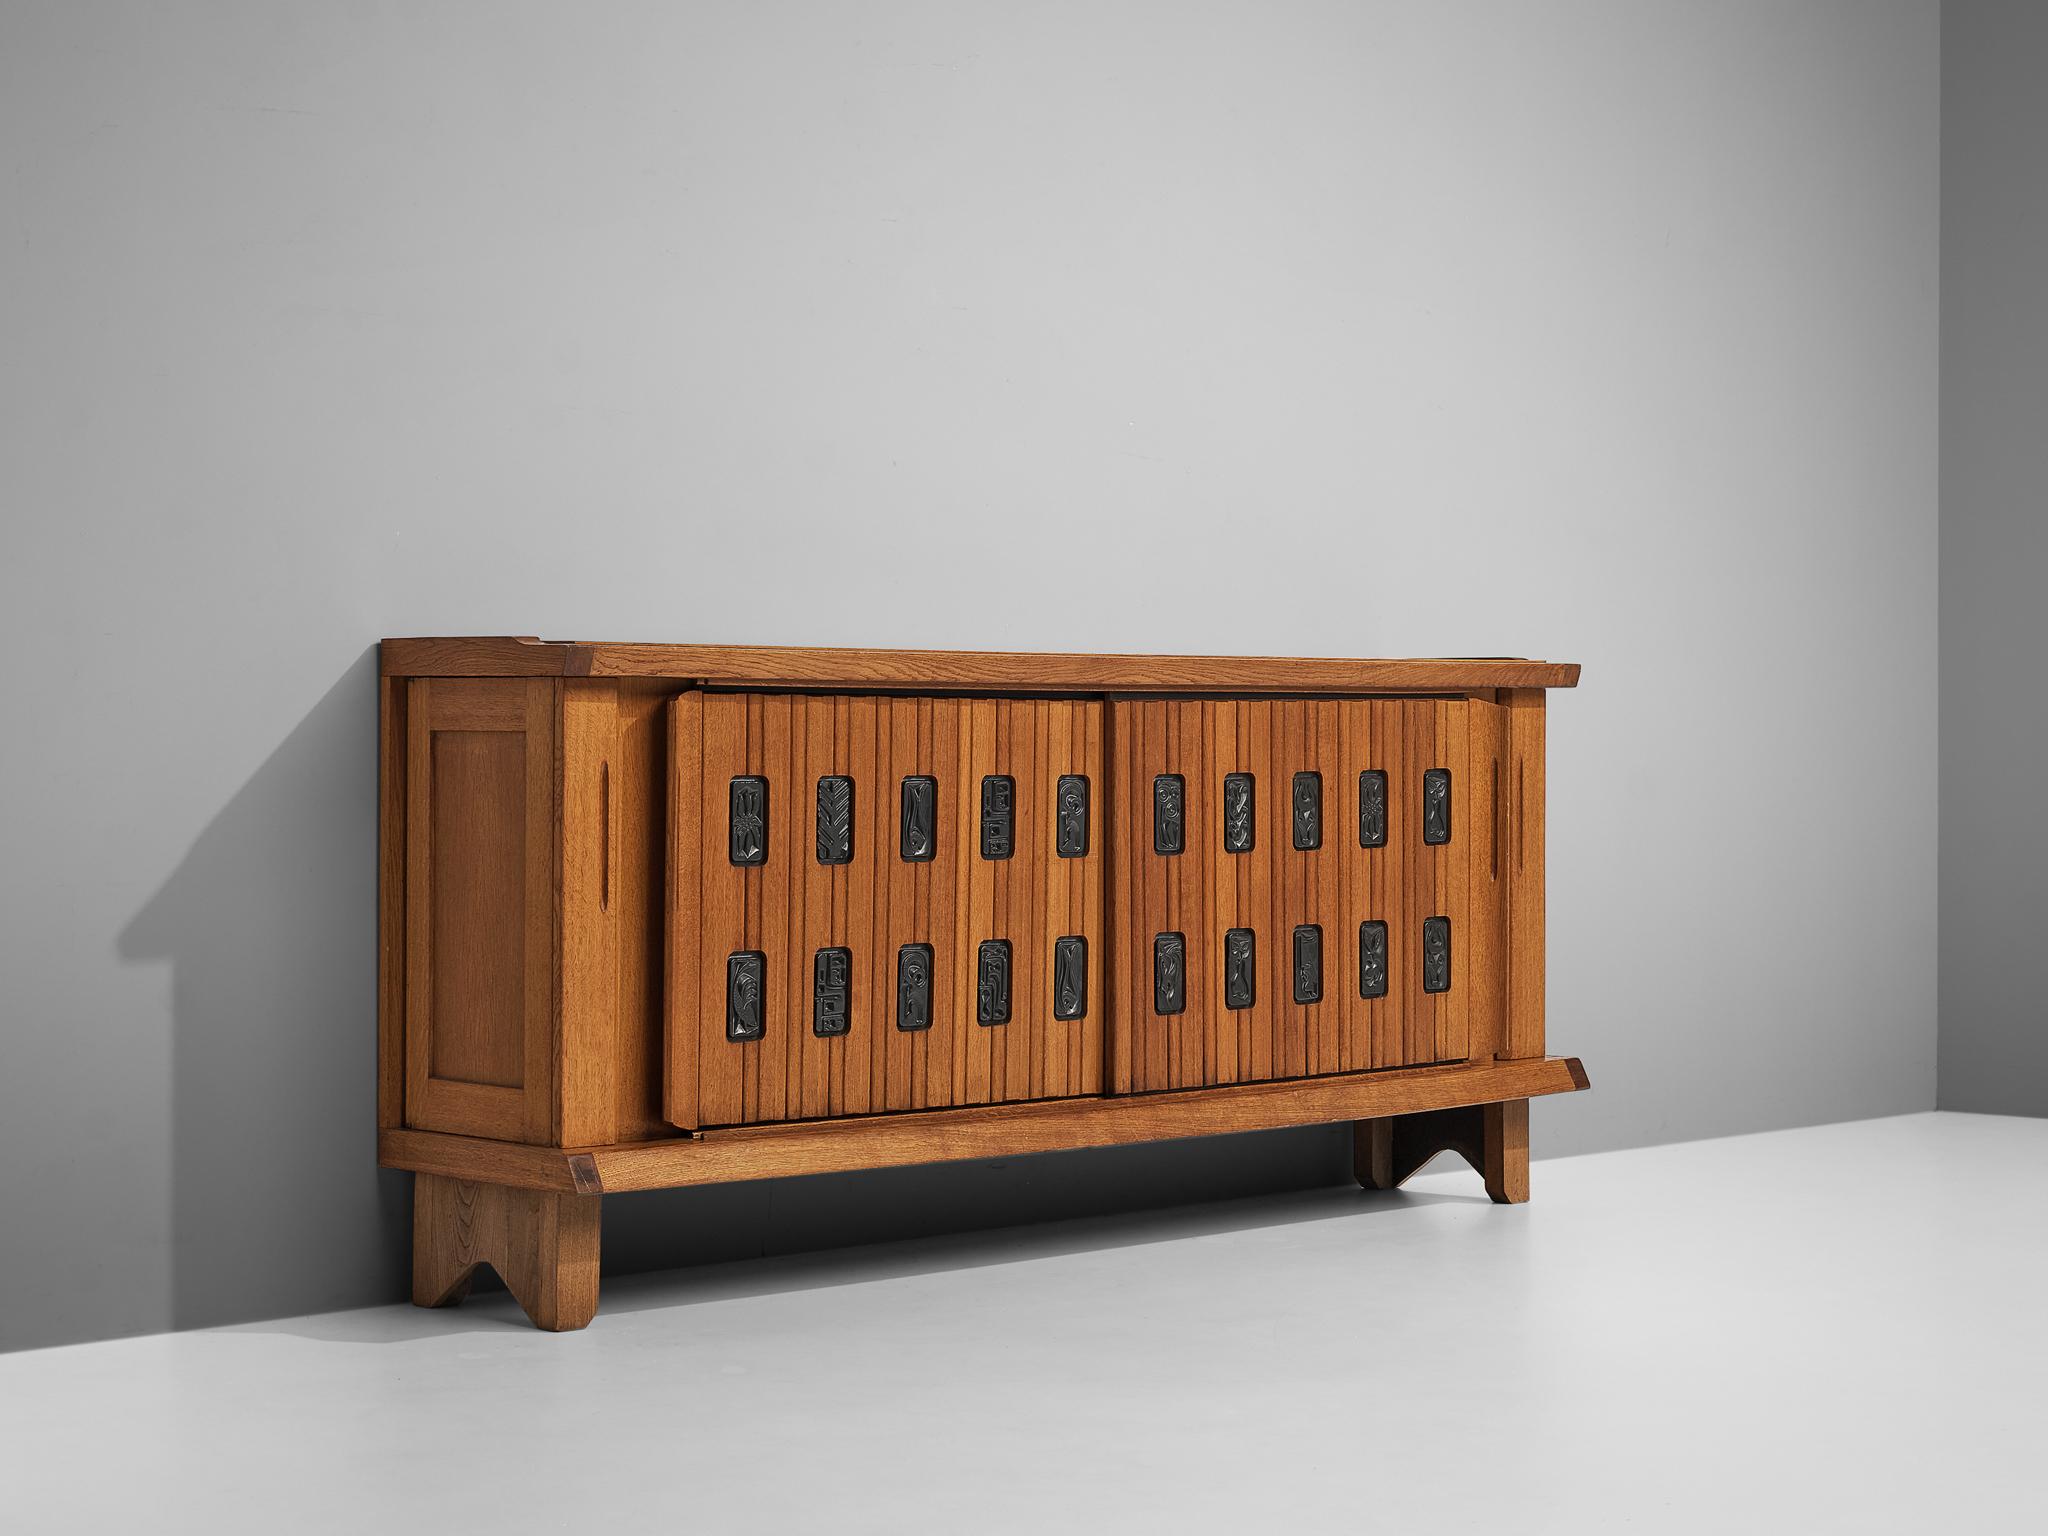 Guillerme et Chambron, sideboard, solid oak, ceramic tiles, France, 1950s

This cabinet holds the characteristics of the French designer duo Guillerme & Chambron. The base has typical legs and provides a floating appearance to the storage part.